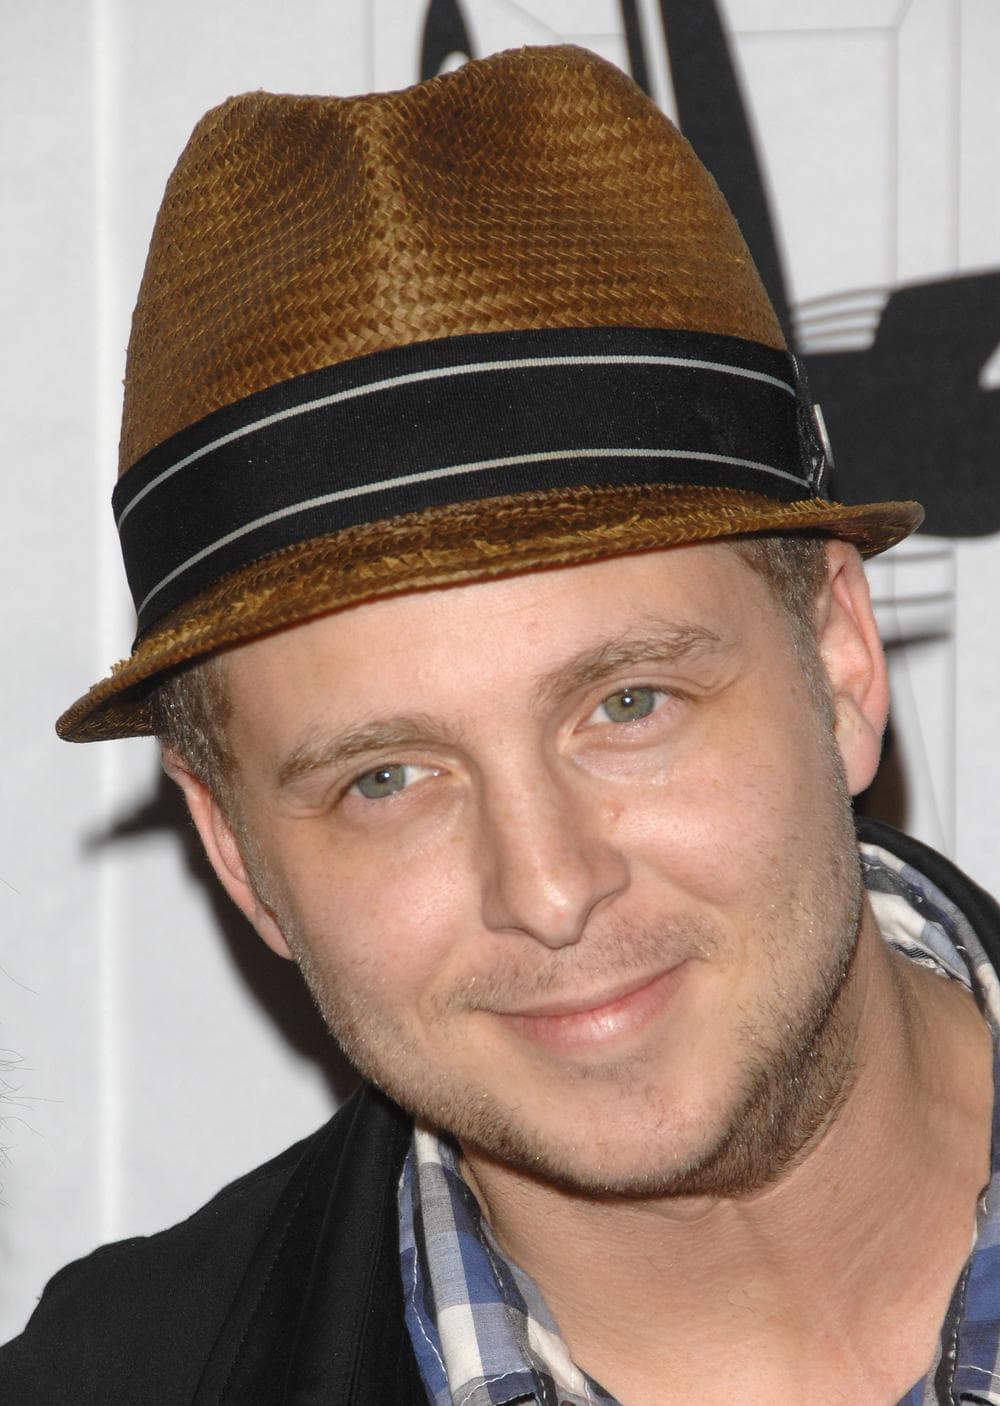 Ryan Tedder attends the 40th annual Songwriters Hall of Fame ceremony in New York. (AP)